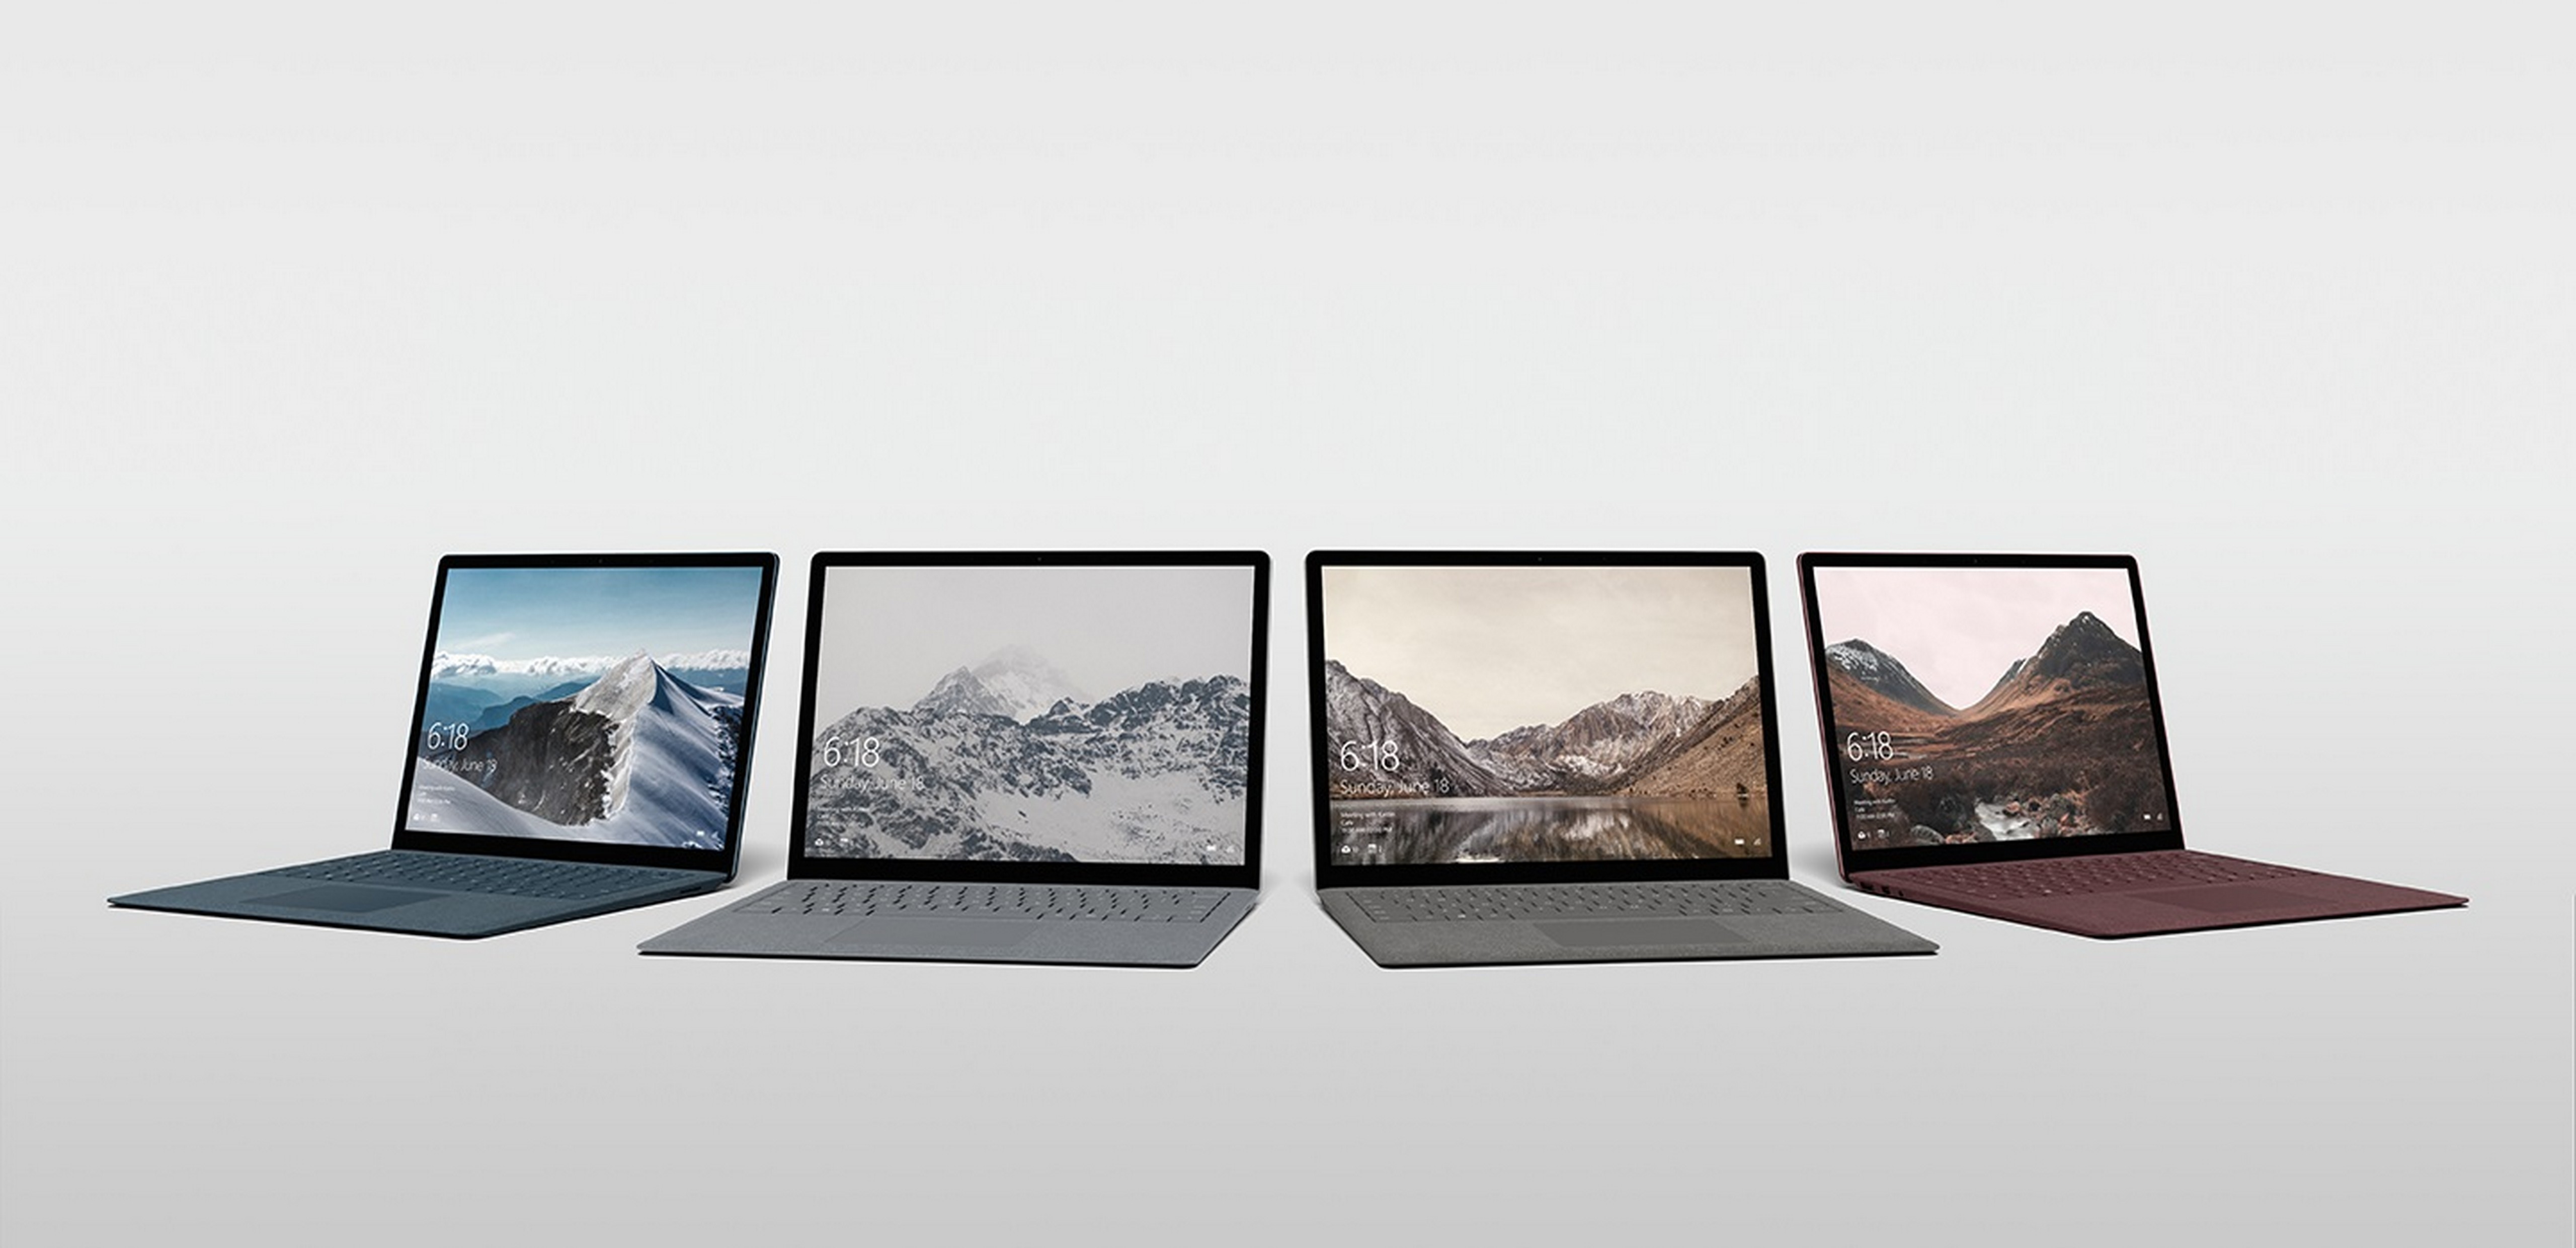 Microsoft Surface Laptop shown above closed in all four colors, Platinum, Graphite Gold, Cobalt Blue and Burgundy